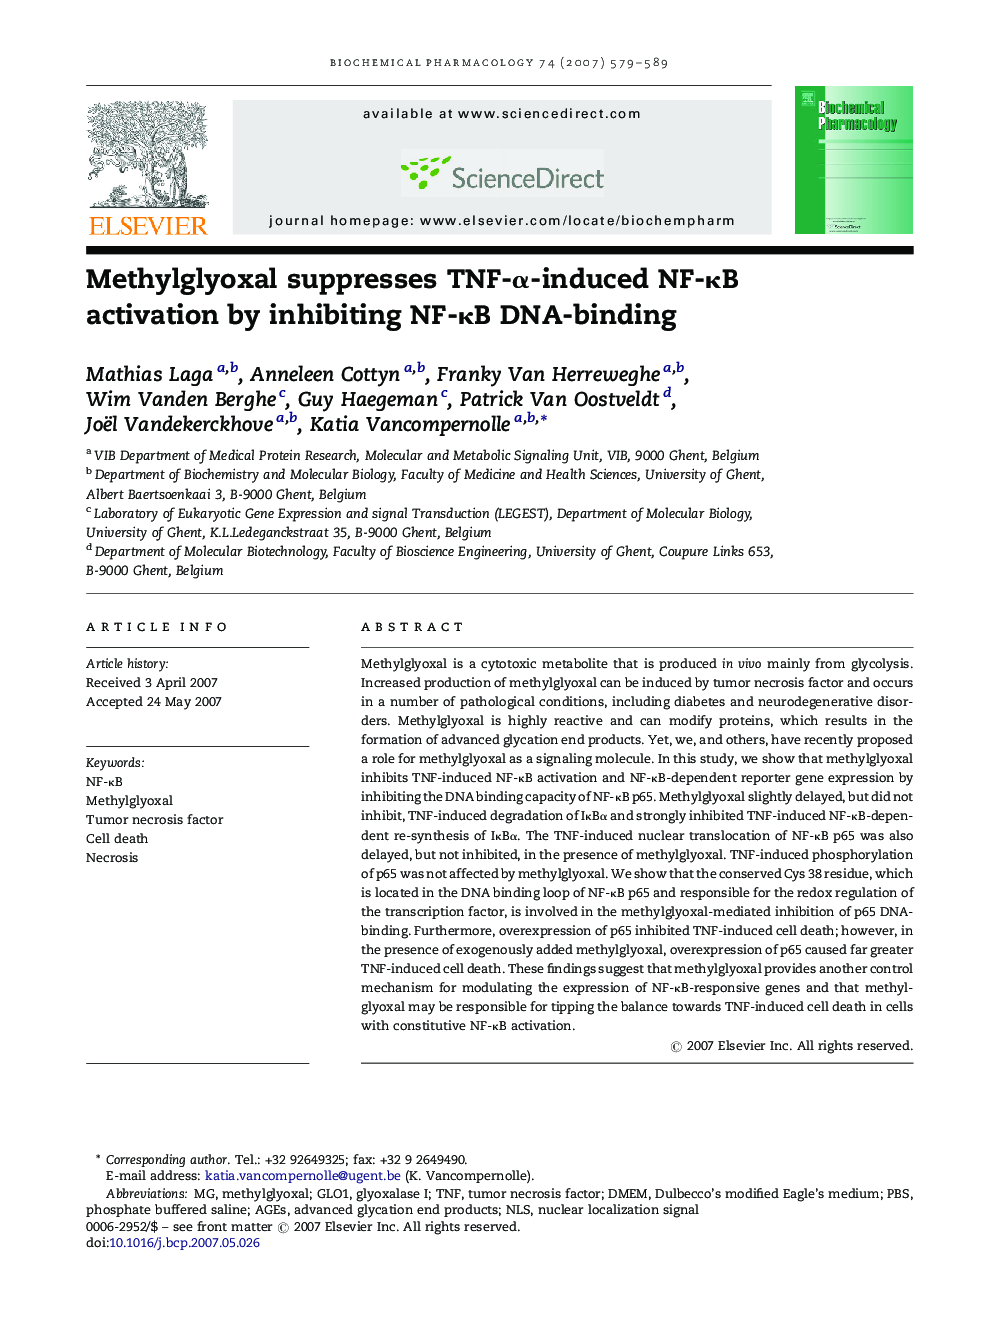 Methylglyoxal suppresses TNF-α-induced NF-κB activation by inhibiting NF-κB DNA-binding